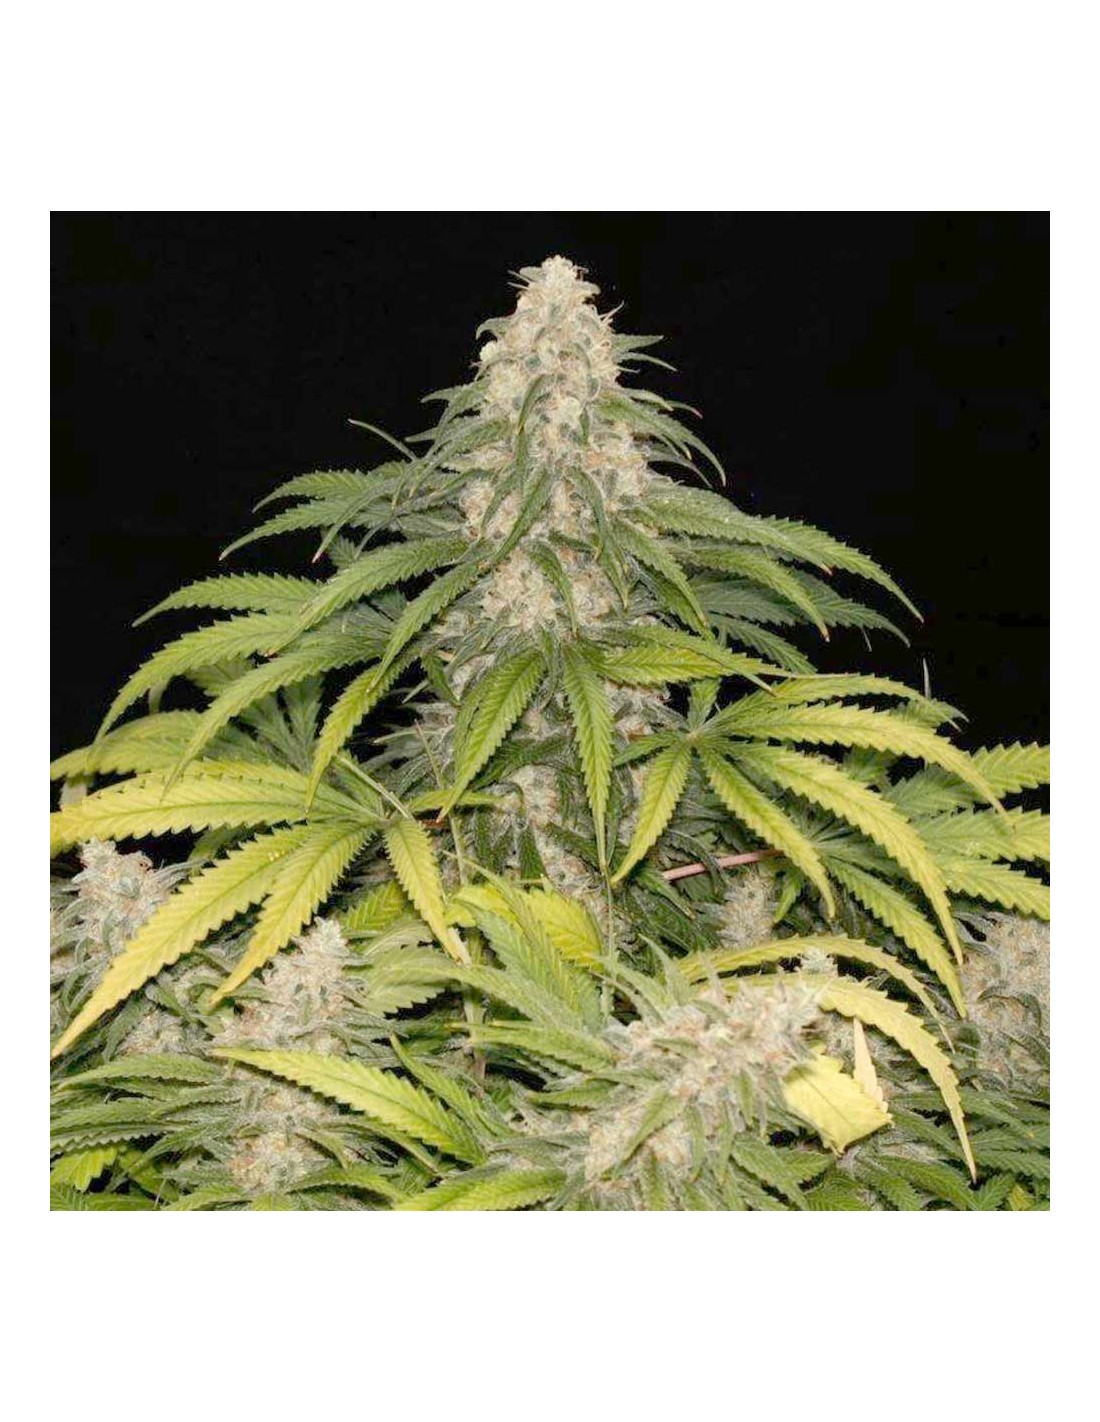 Buy Sour Grape Kush S1 from Ultra Genetics Seeds at Oaseeds